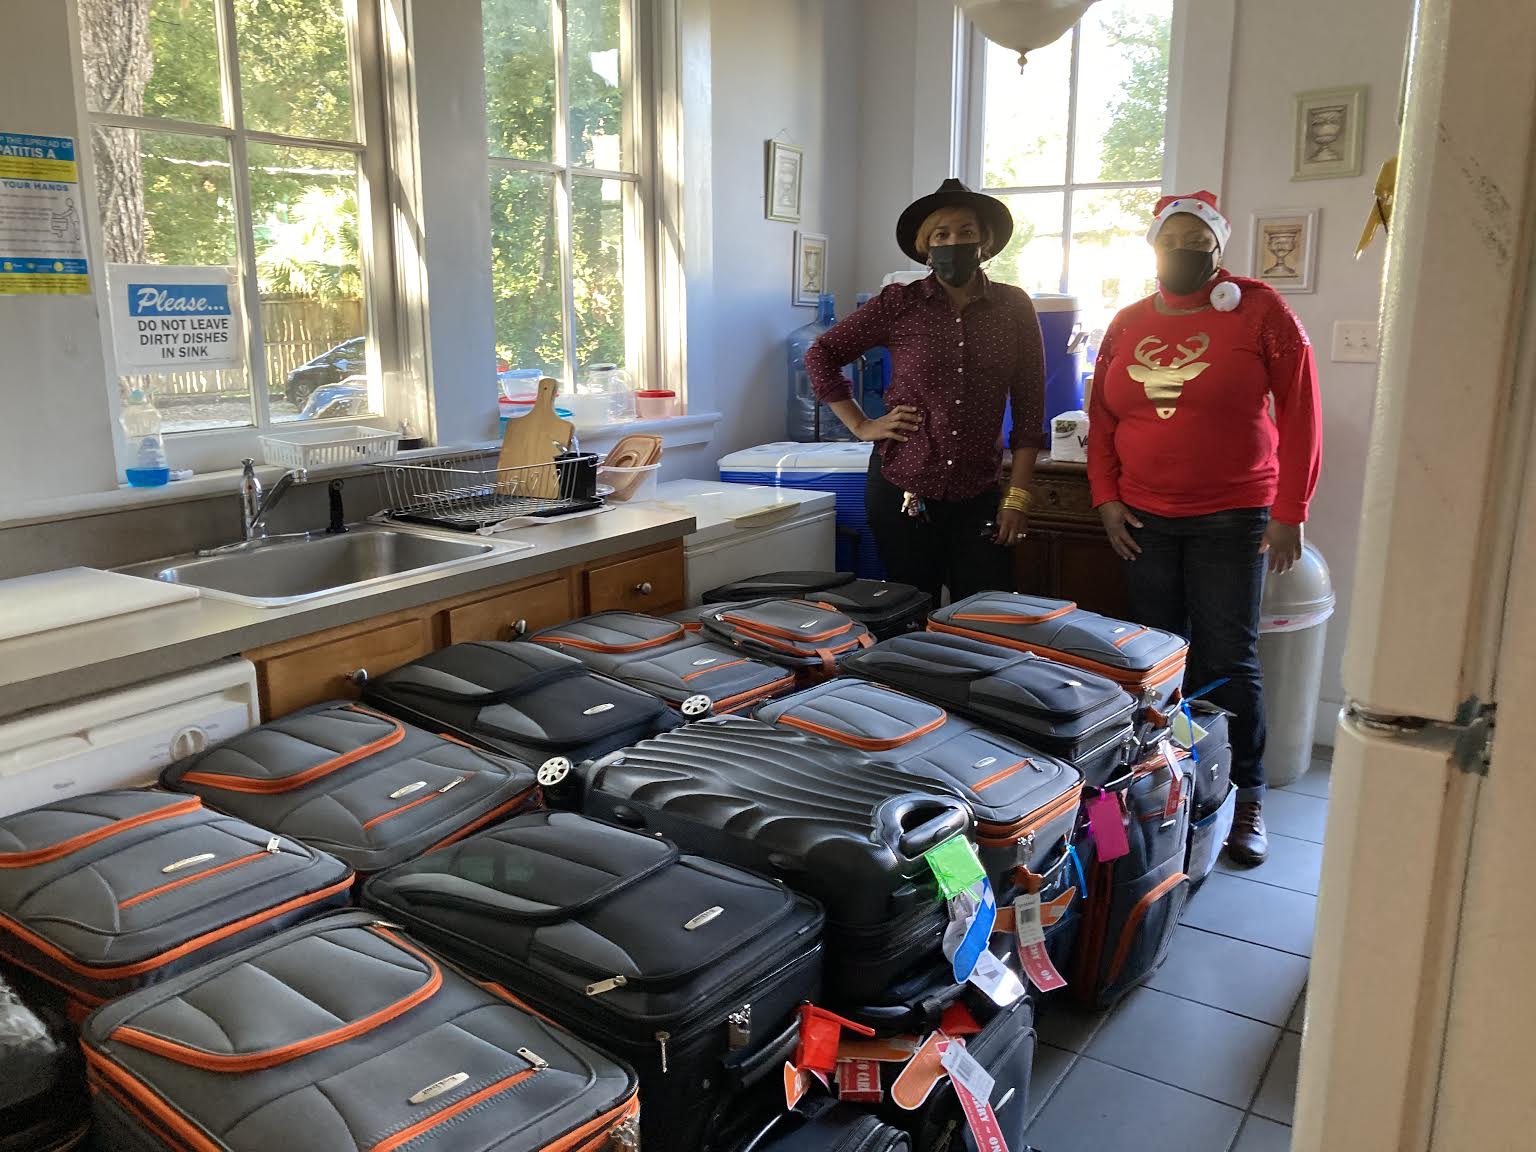 Packing with Purpose Suitcase Donation 2022 – The Knighten Project